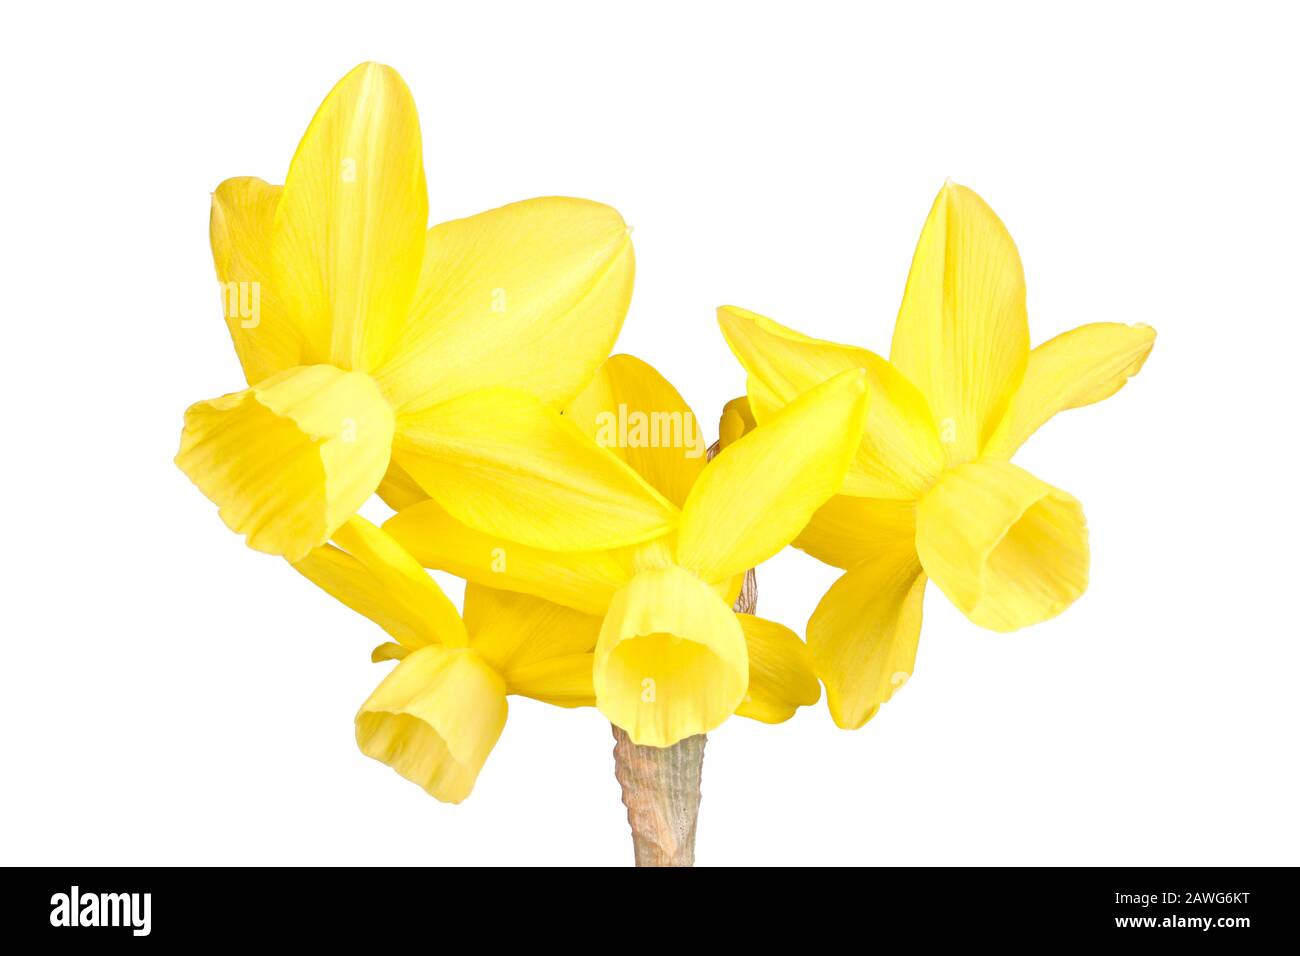 Stem with four yellow flowers of a Narcissus triandrus daffodil hybrid cultivar isolated against a white background Stock Photo